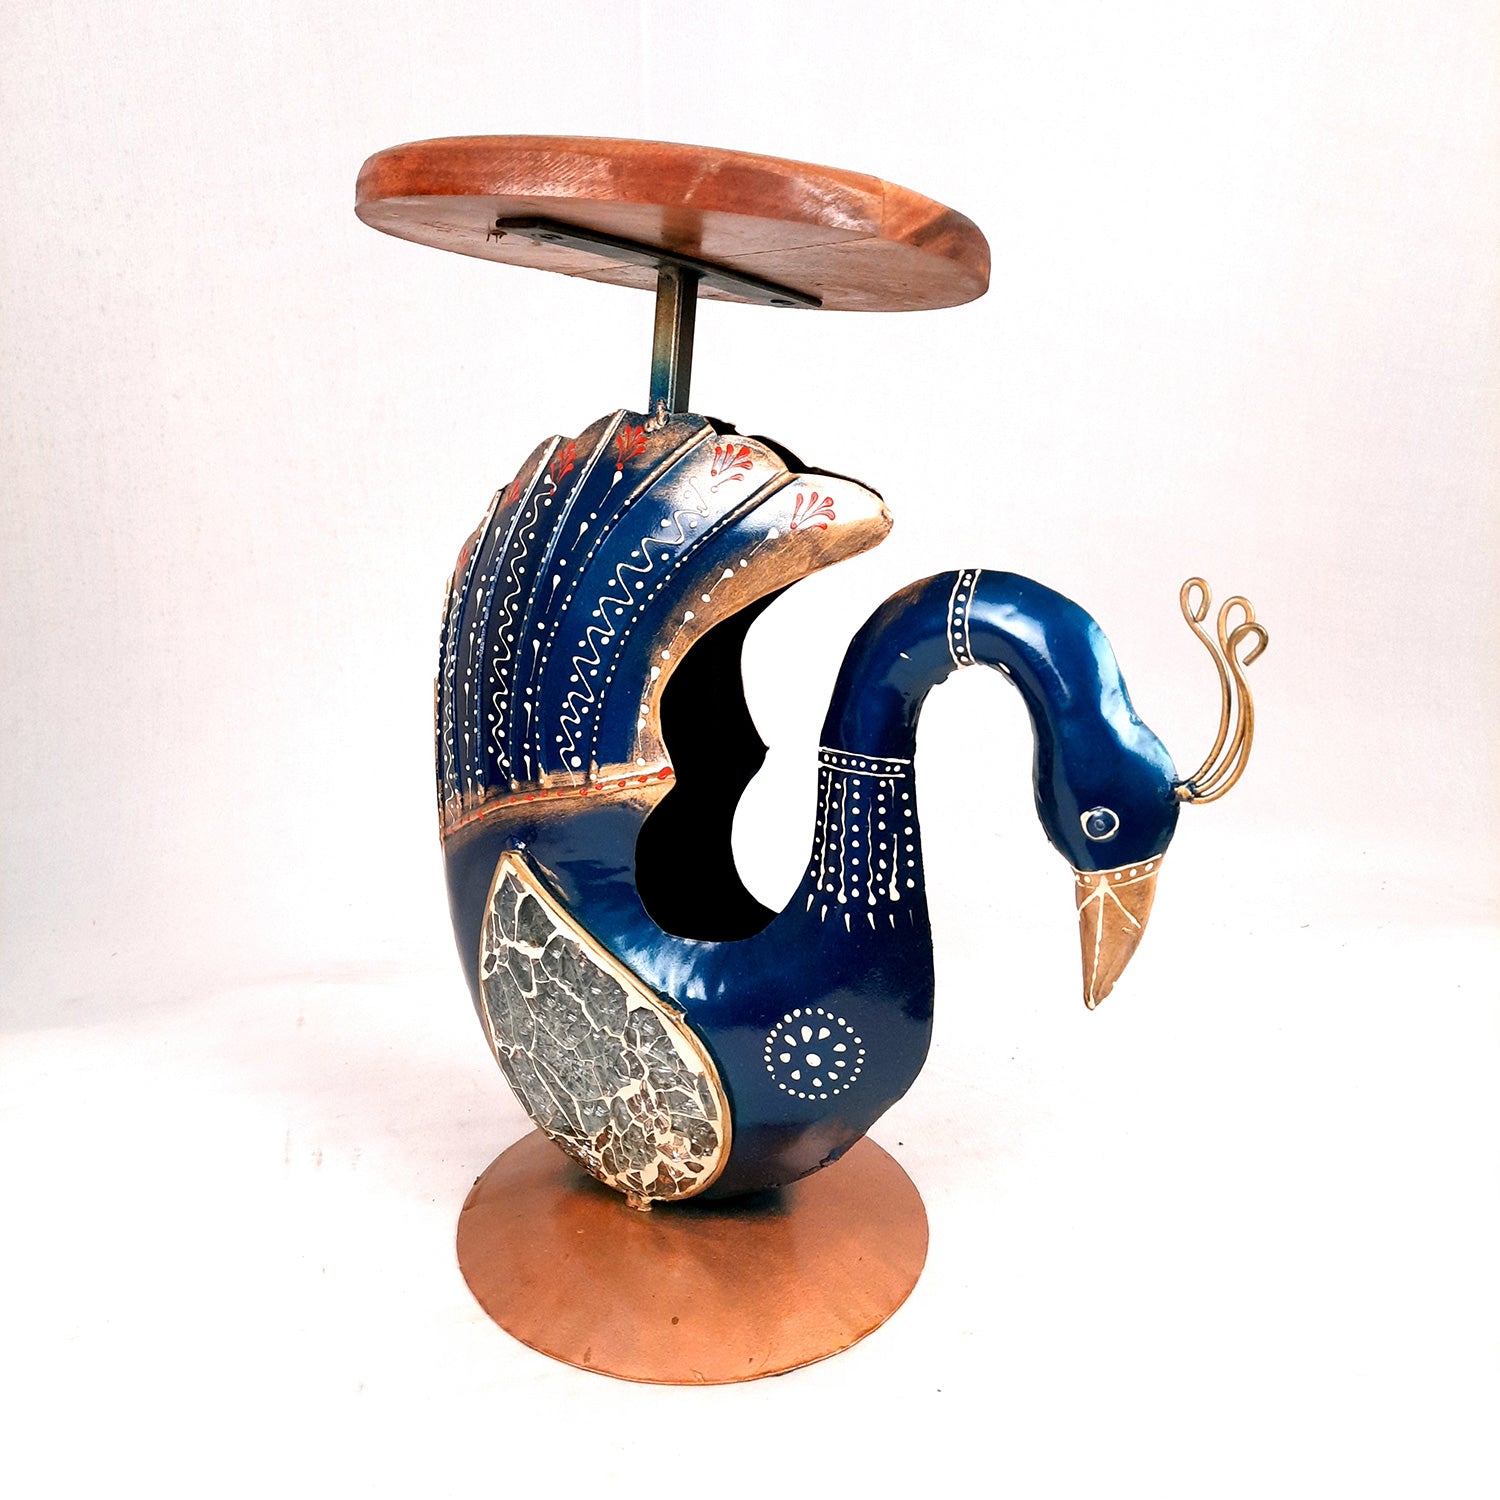 Antique Side Table Swan Design - 15 Inch for Home and Corner Decor - ApkaMartSide Table Peacock Design | End Table Cum Showpiece - for Living Room, Home and Corner Decor & Gift - 15 Inch - apkamart #Color_Blue